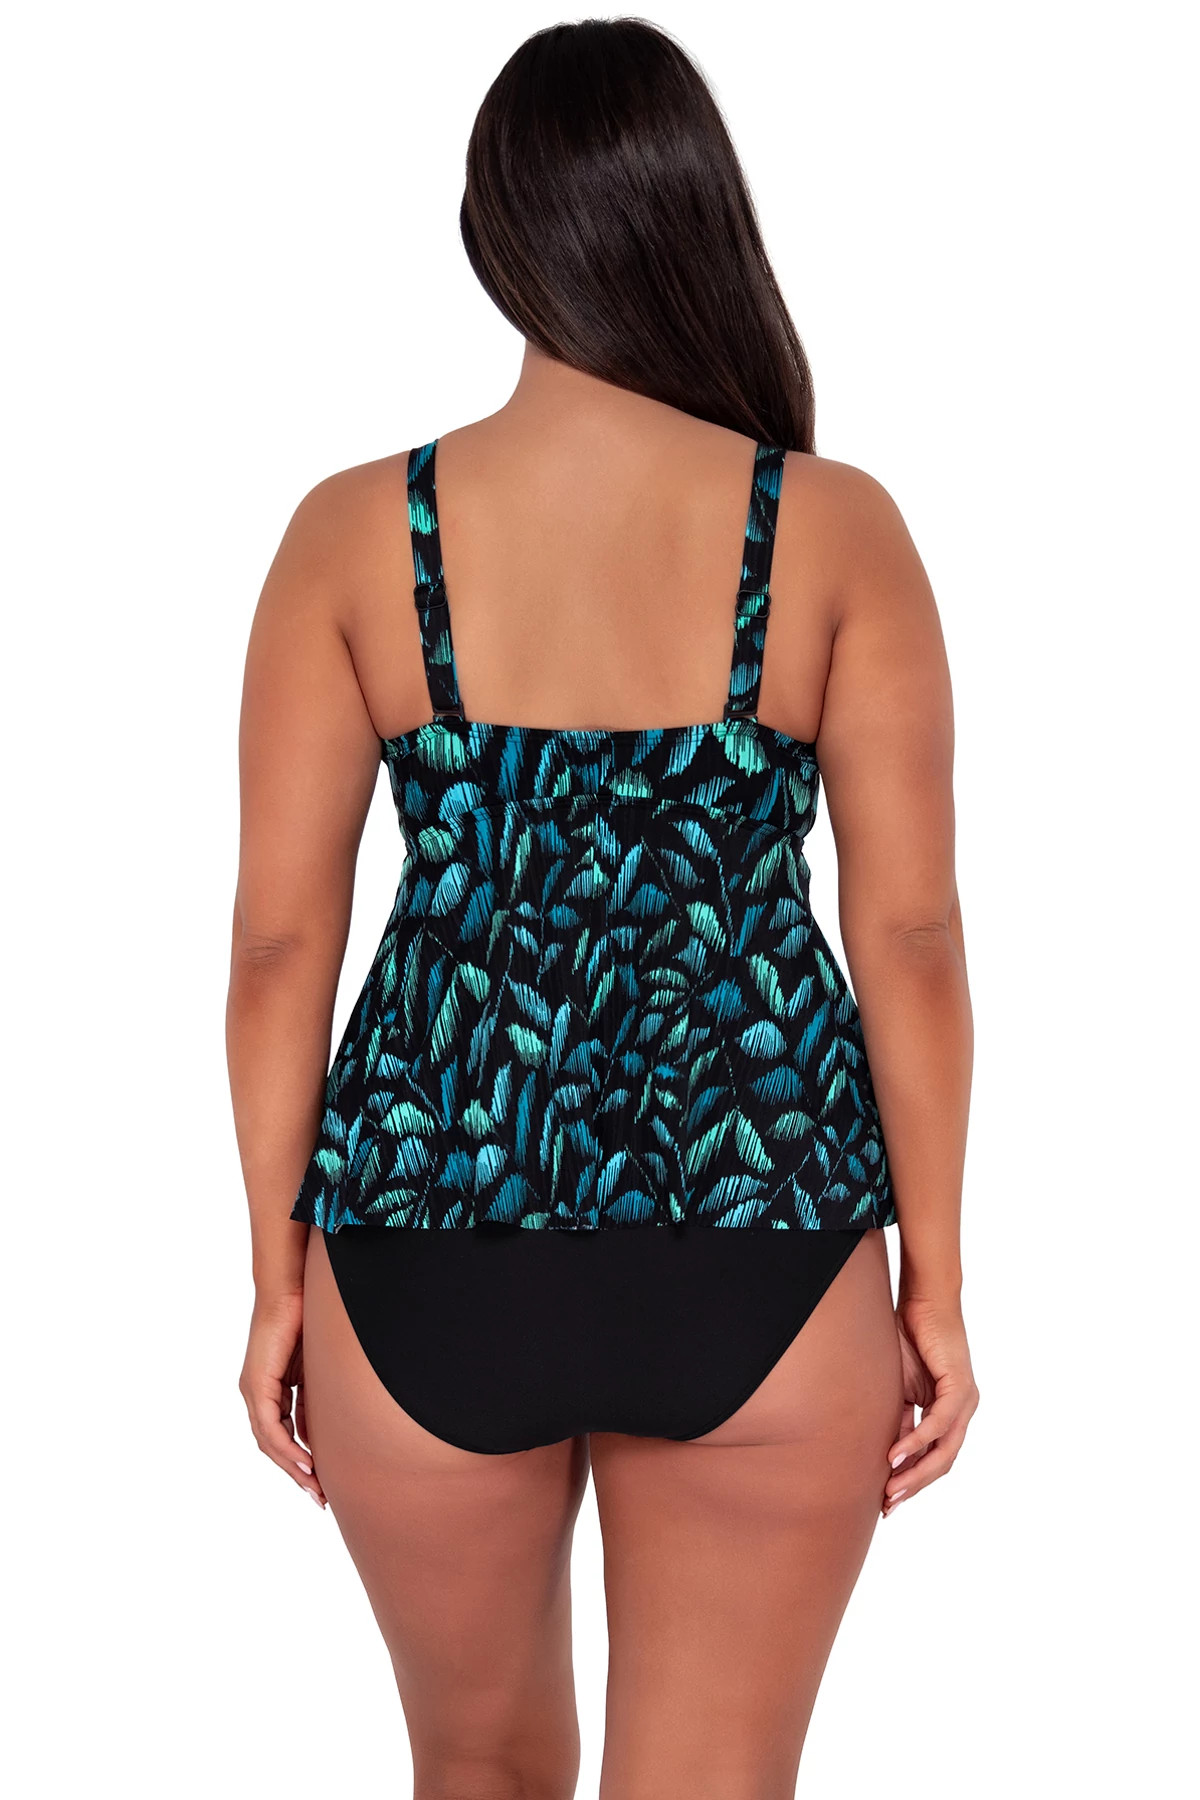 CASCADE SEAGRASS TEXTURE Marin Tankini Top image number 3